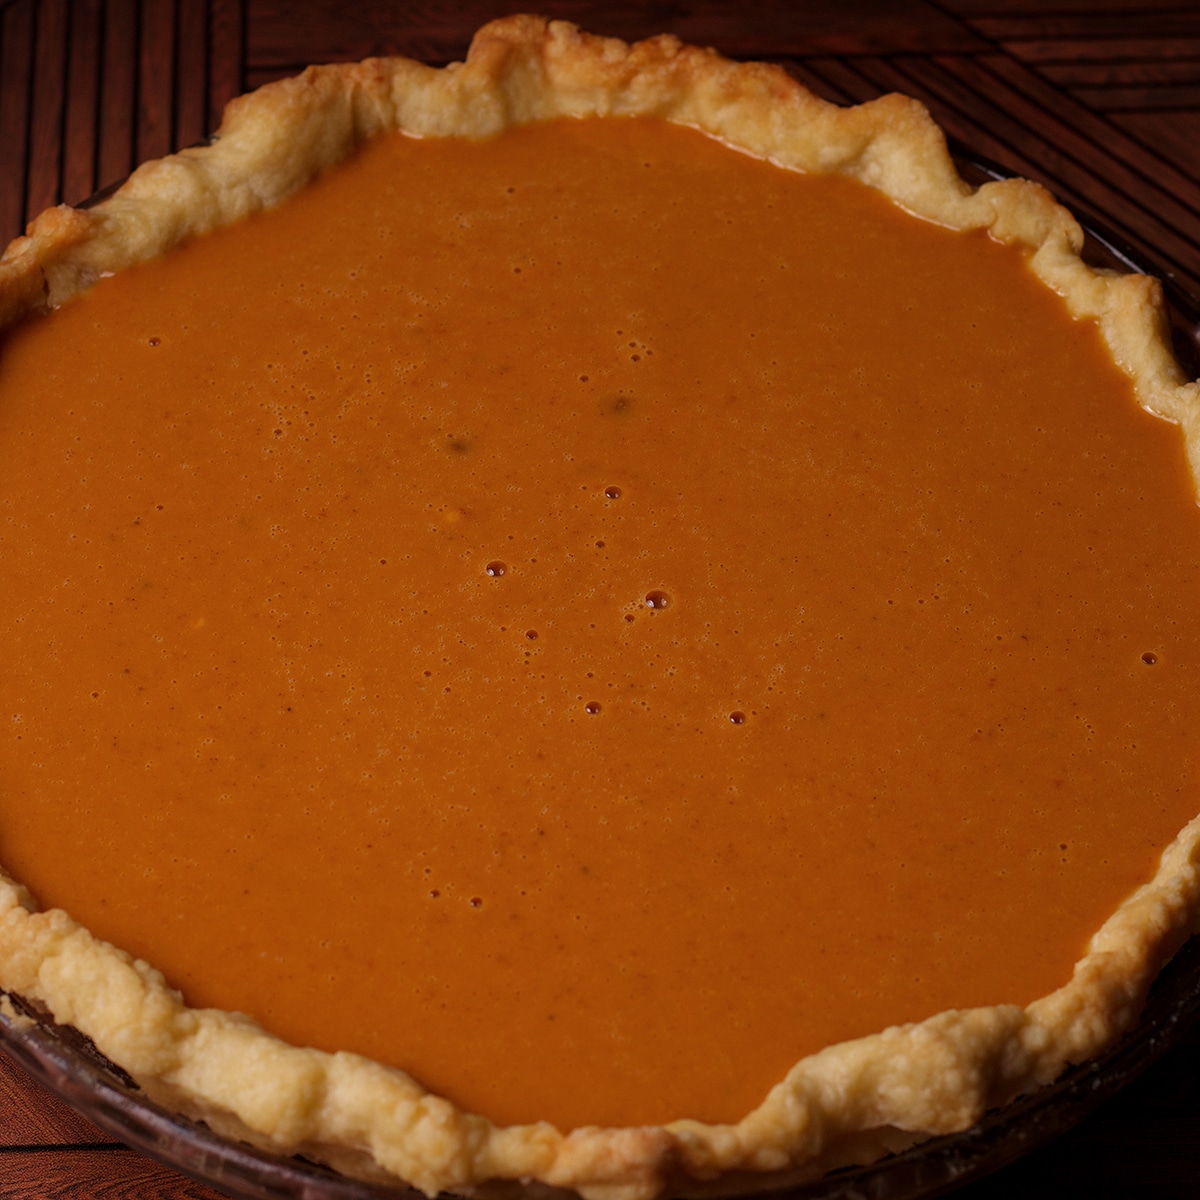 A partially baked pie crust that's been filled with pumpkin pie batter.